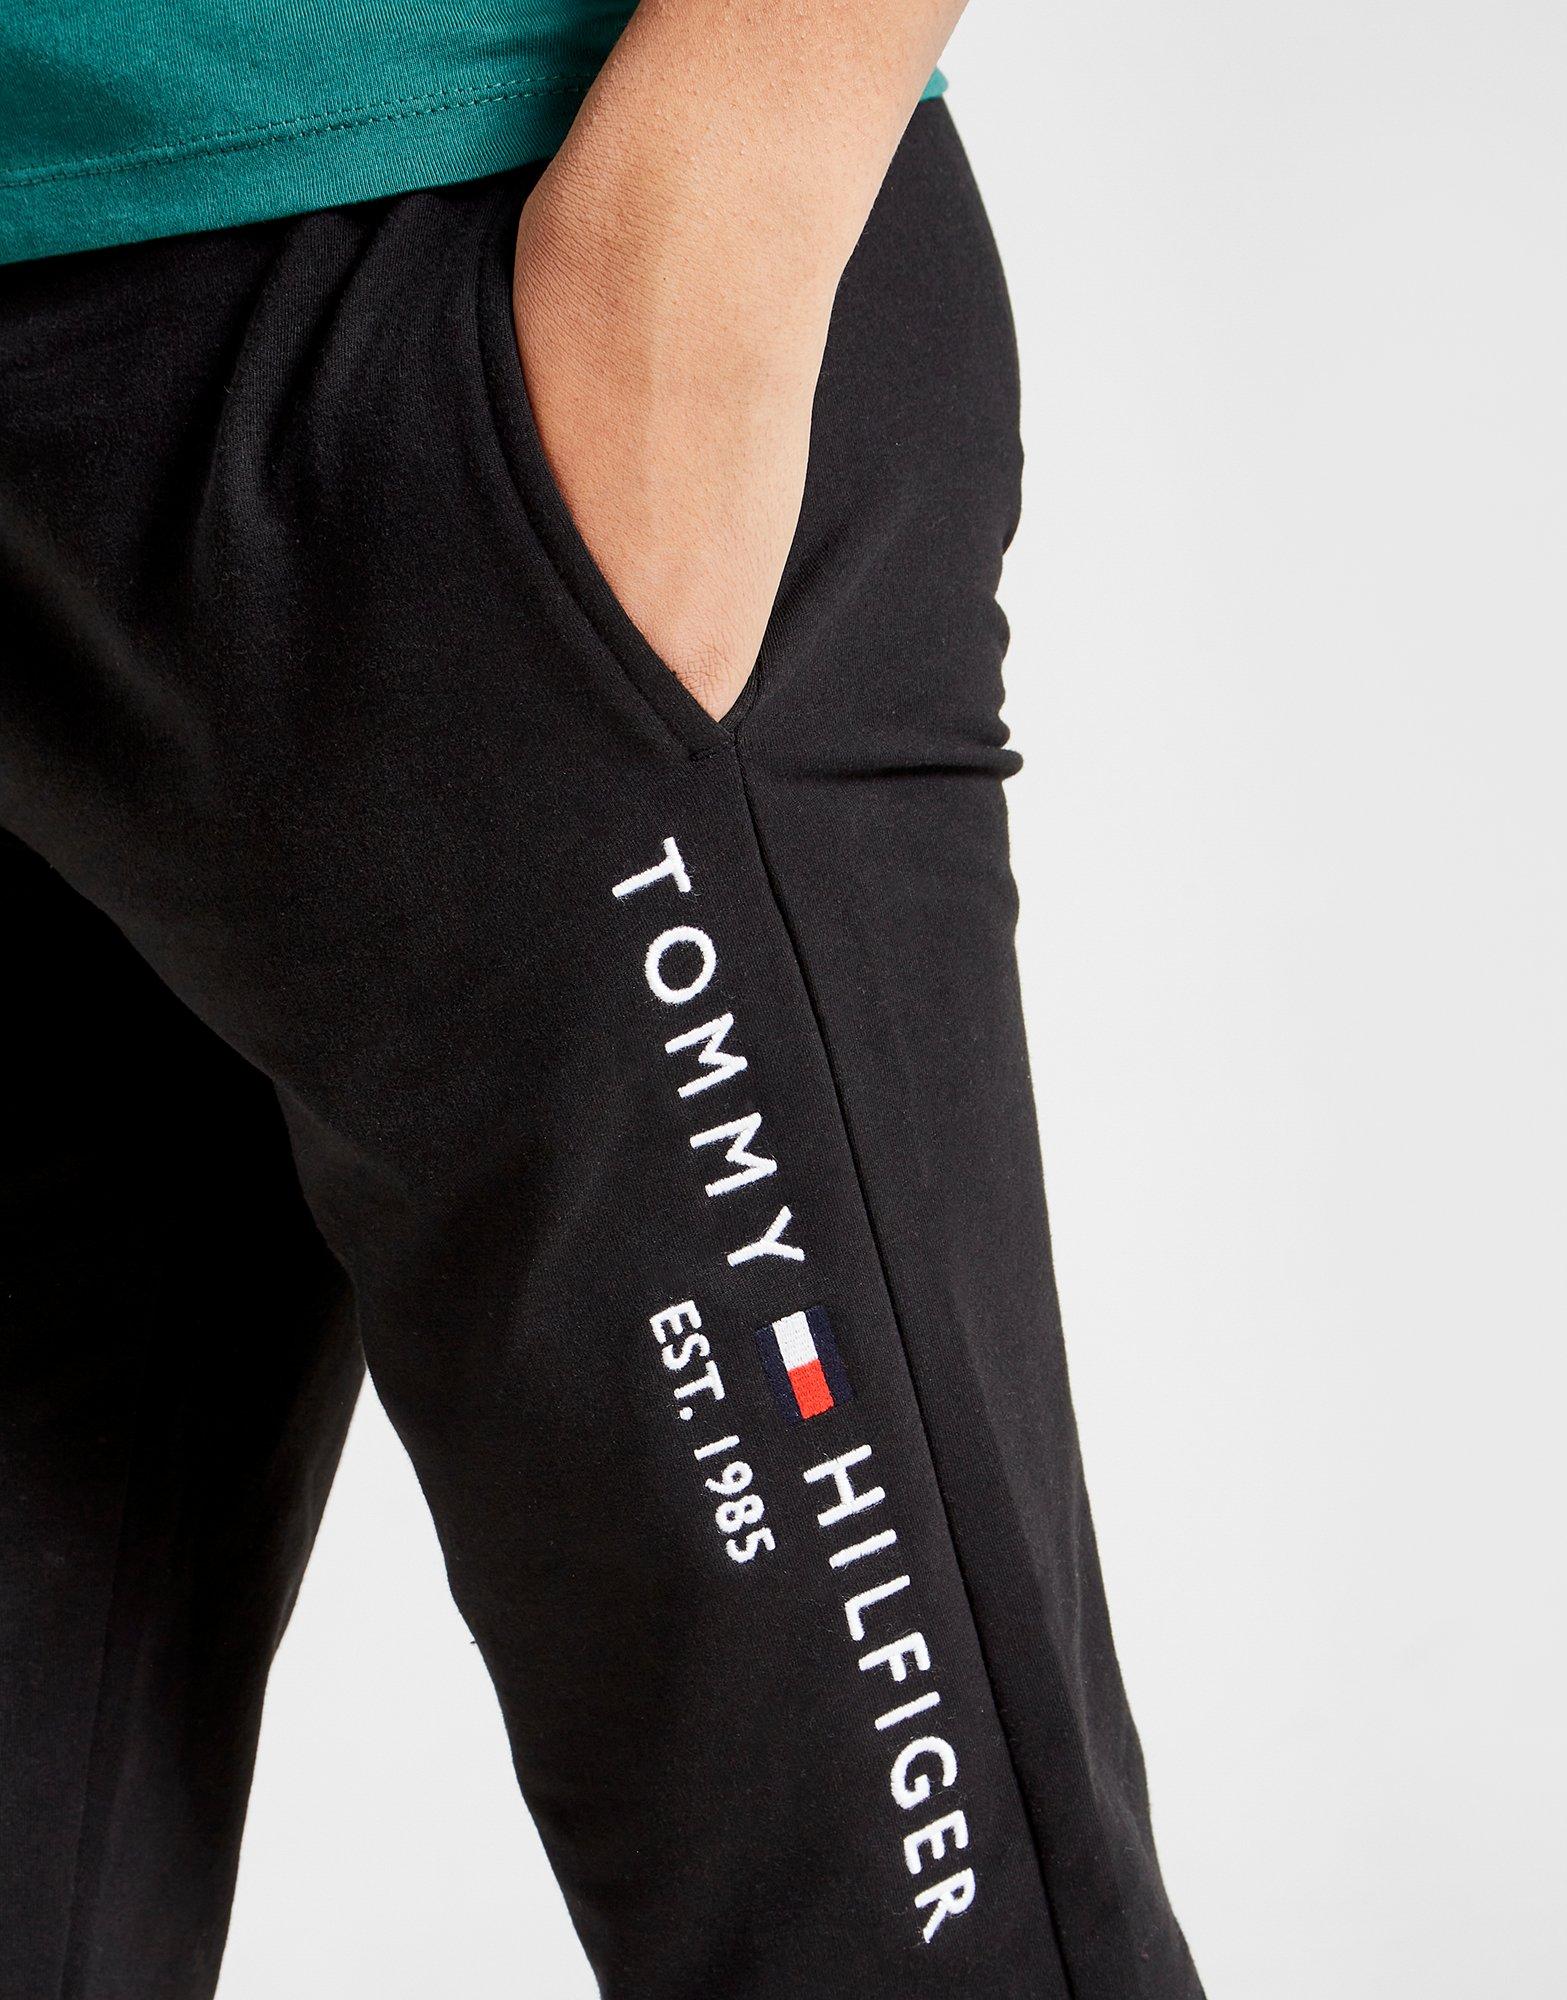 tommy joggers